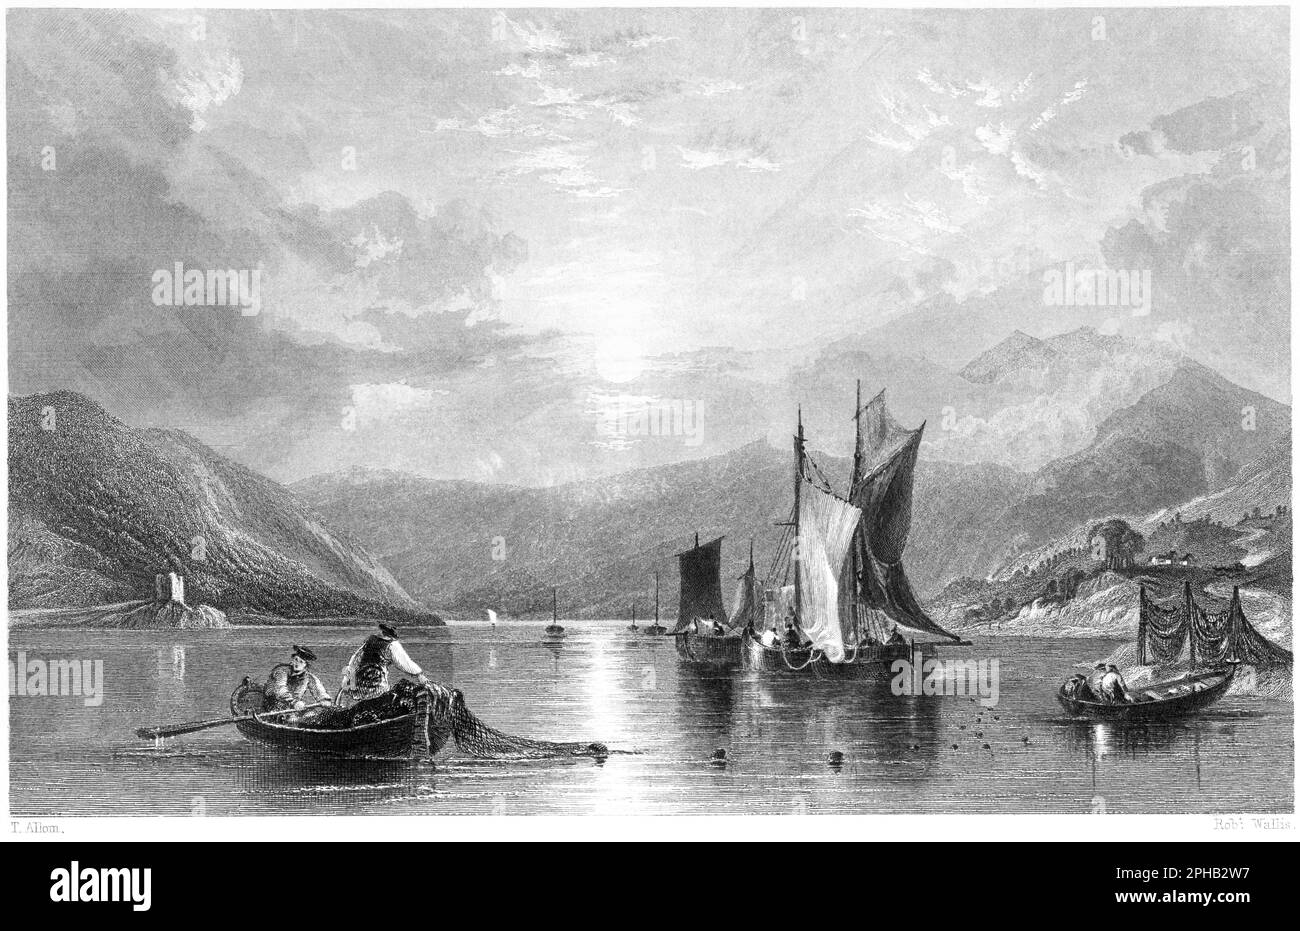 Engraving of Loch Fine (Fyne), Scotland UK scanned at high resolution from a book printed in 1840. This image is believed to be free of all copyright. Stock Photo